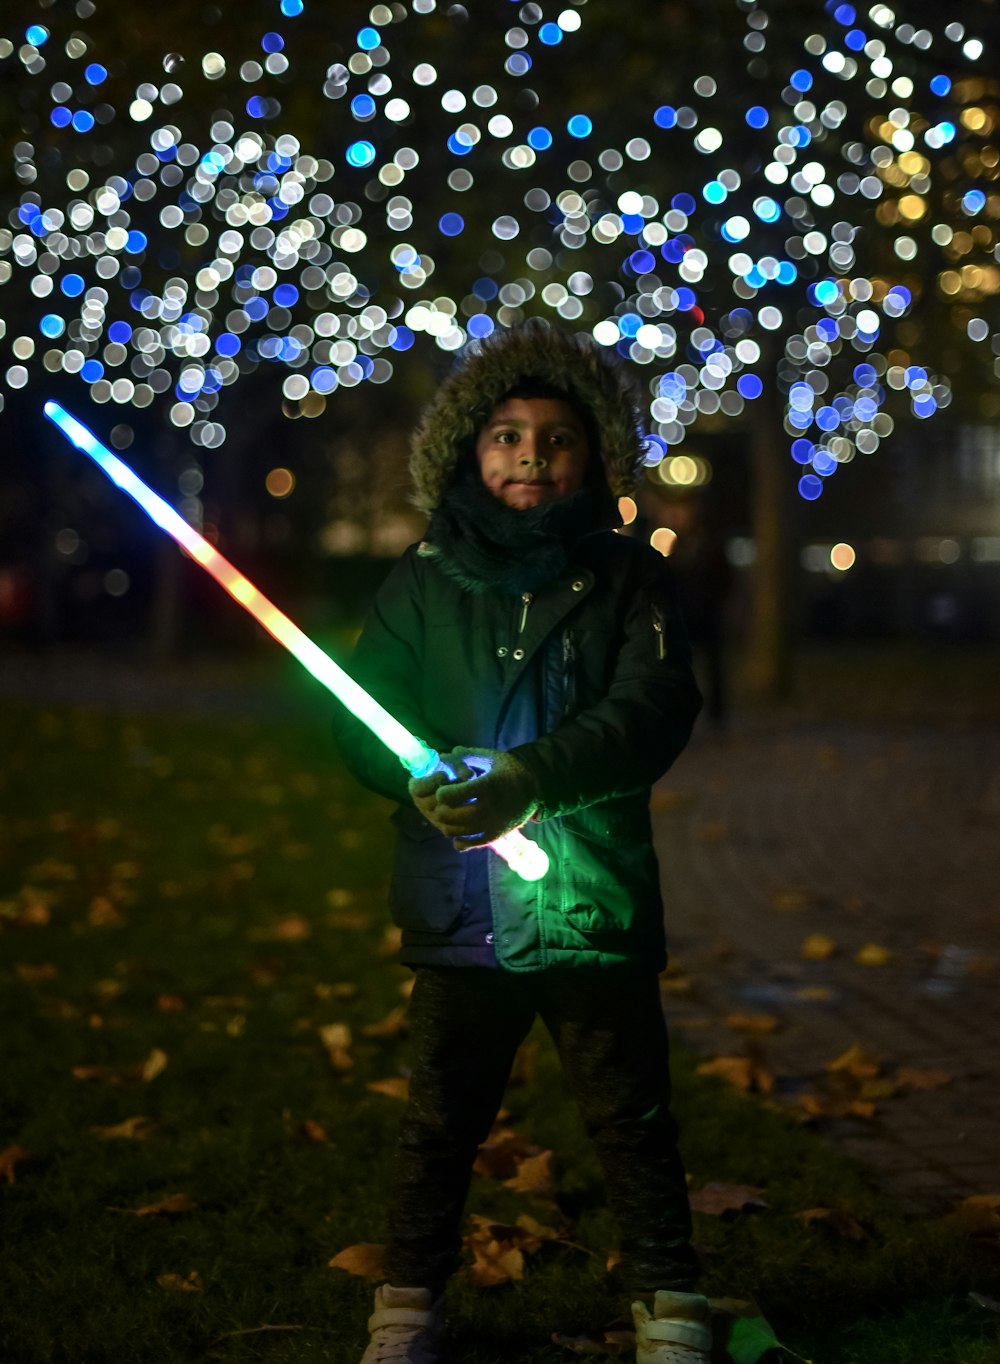 a person holding a light saber in a park